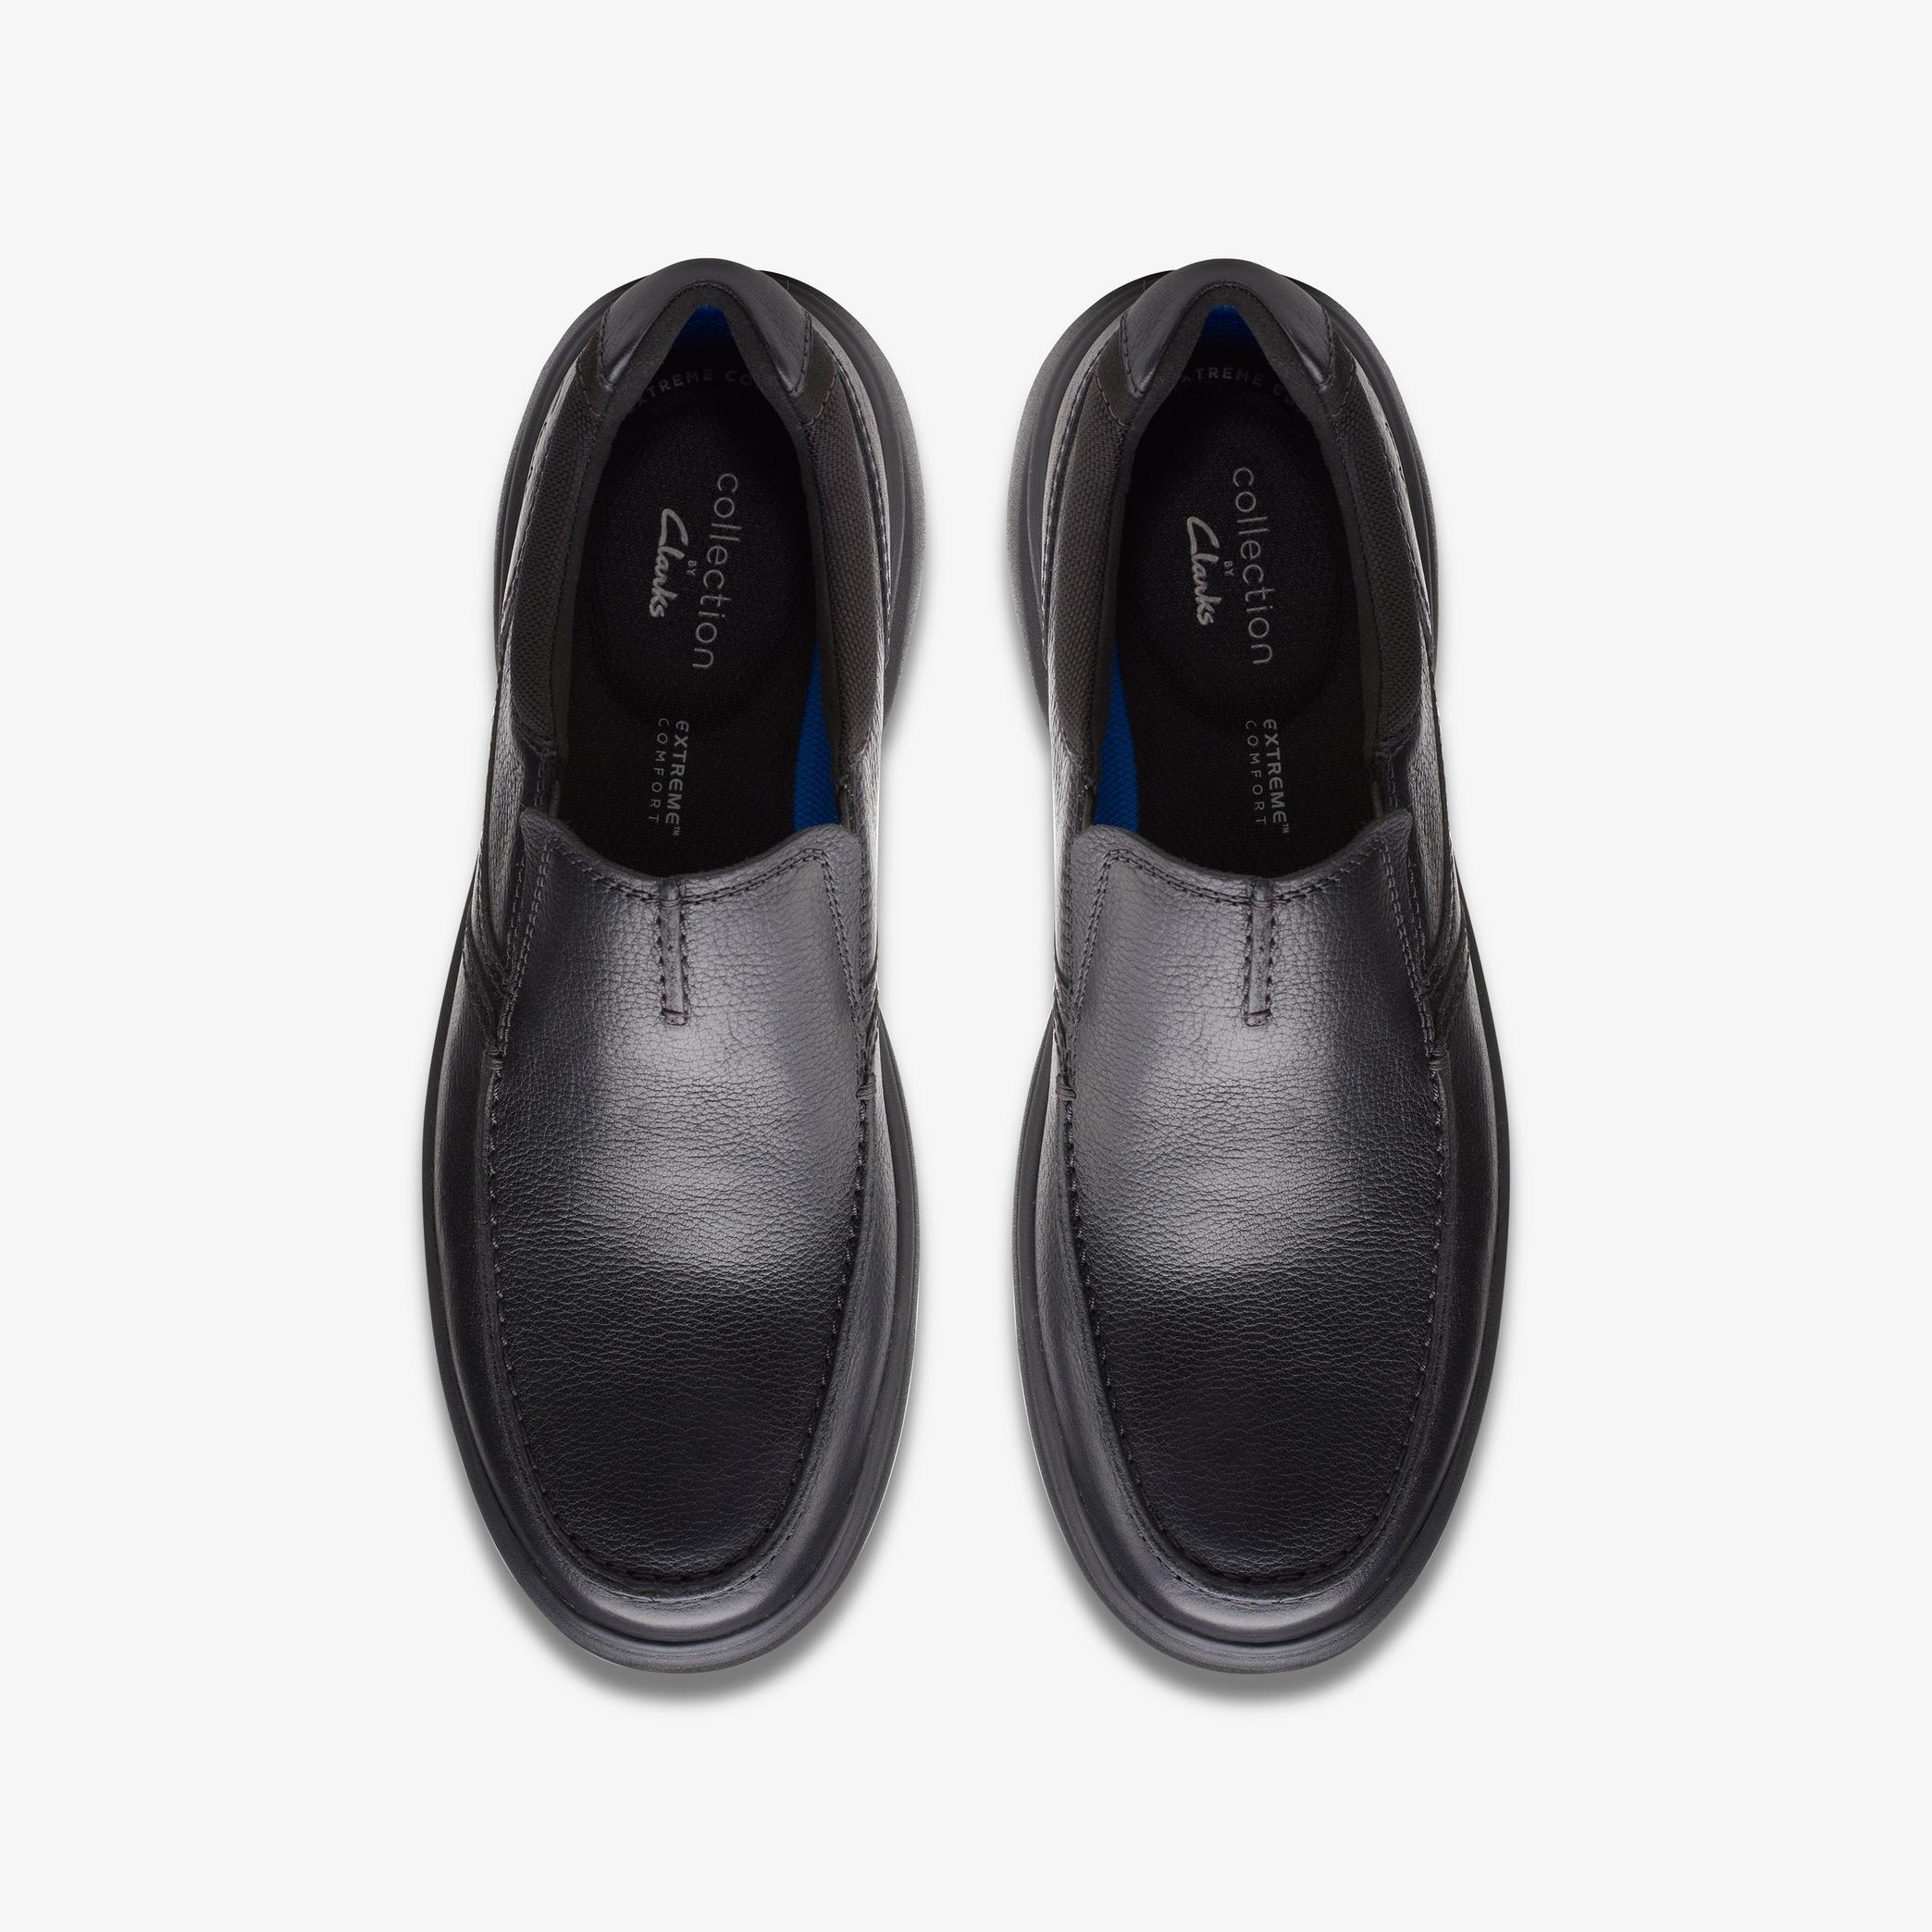 Bradley Free Black Tumbled Leather Loafers, view 6 of 6